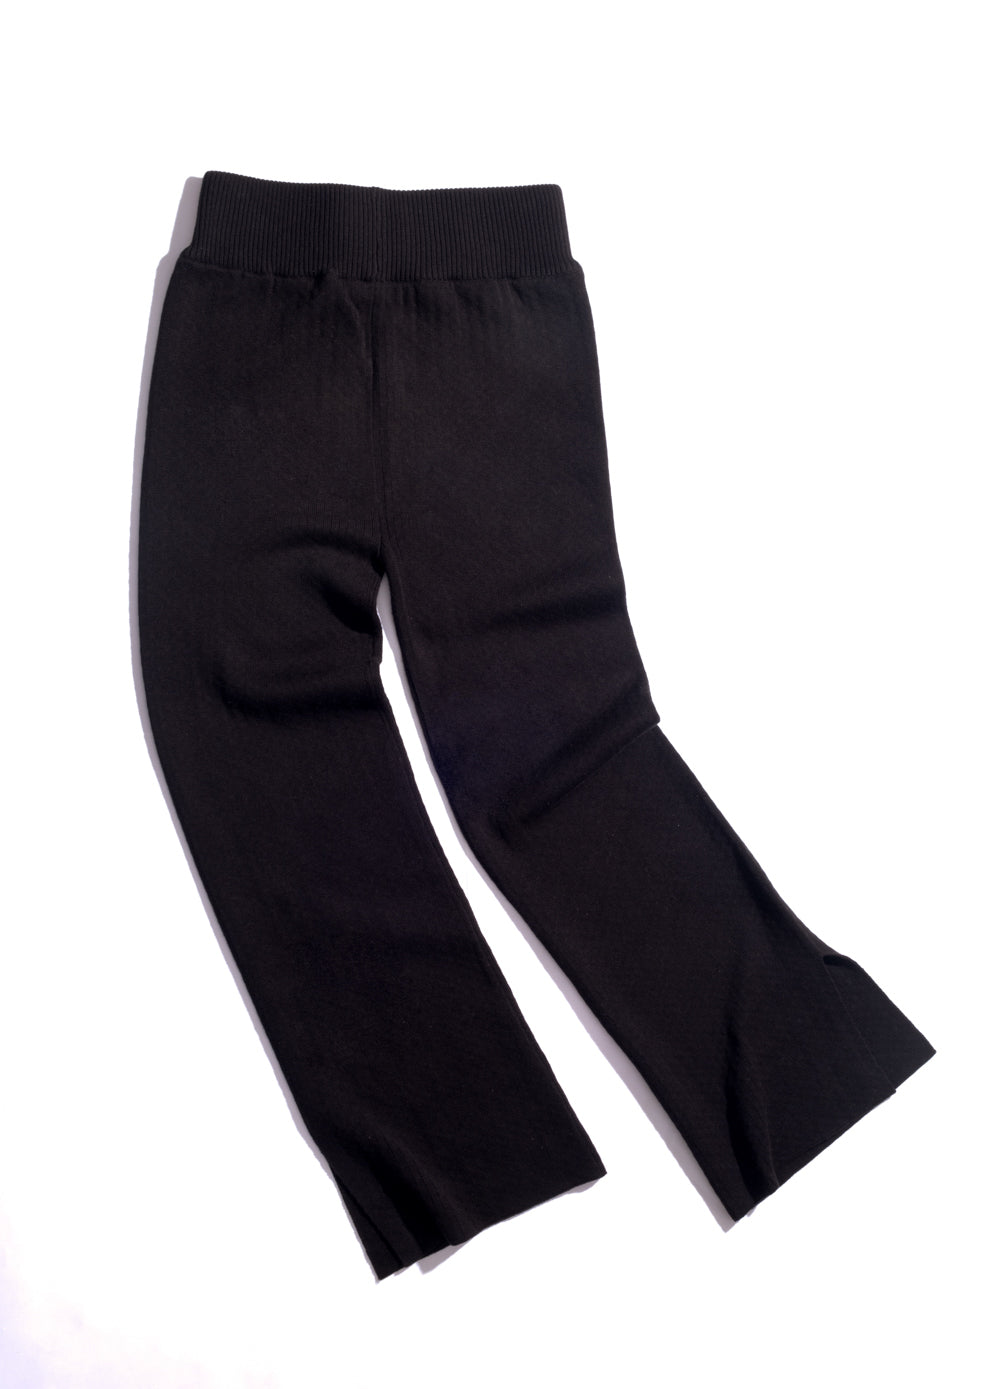 Sustainable winter pants for women